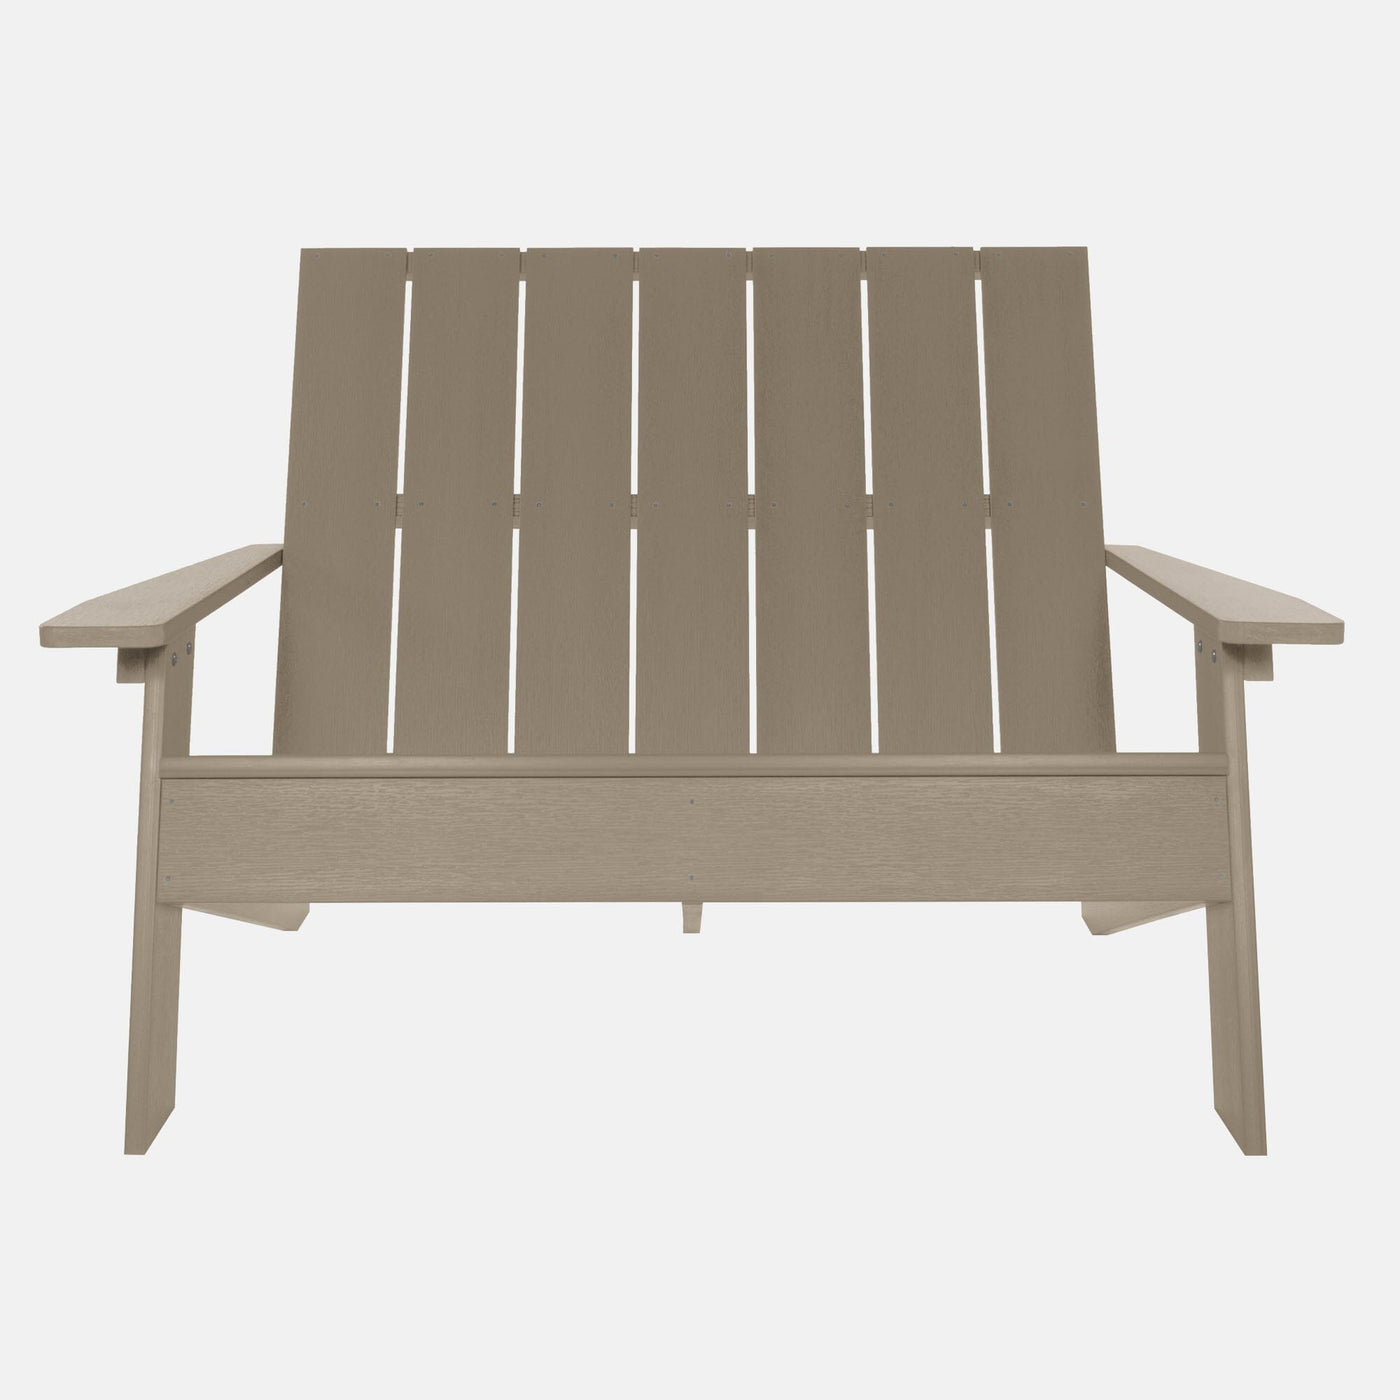 Front view of Italica Modern bench in Woodland Brown